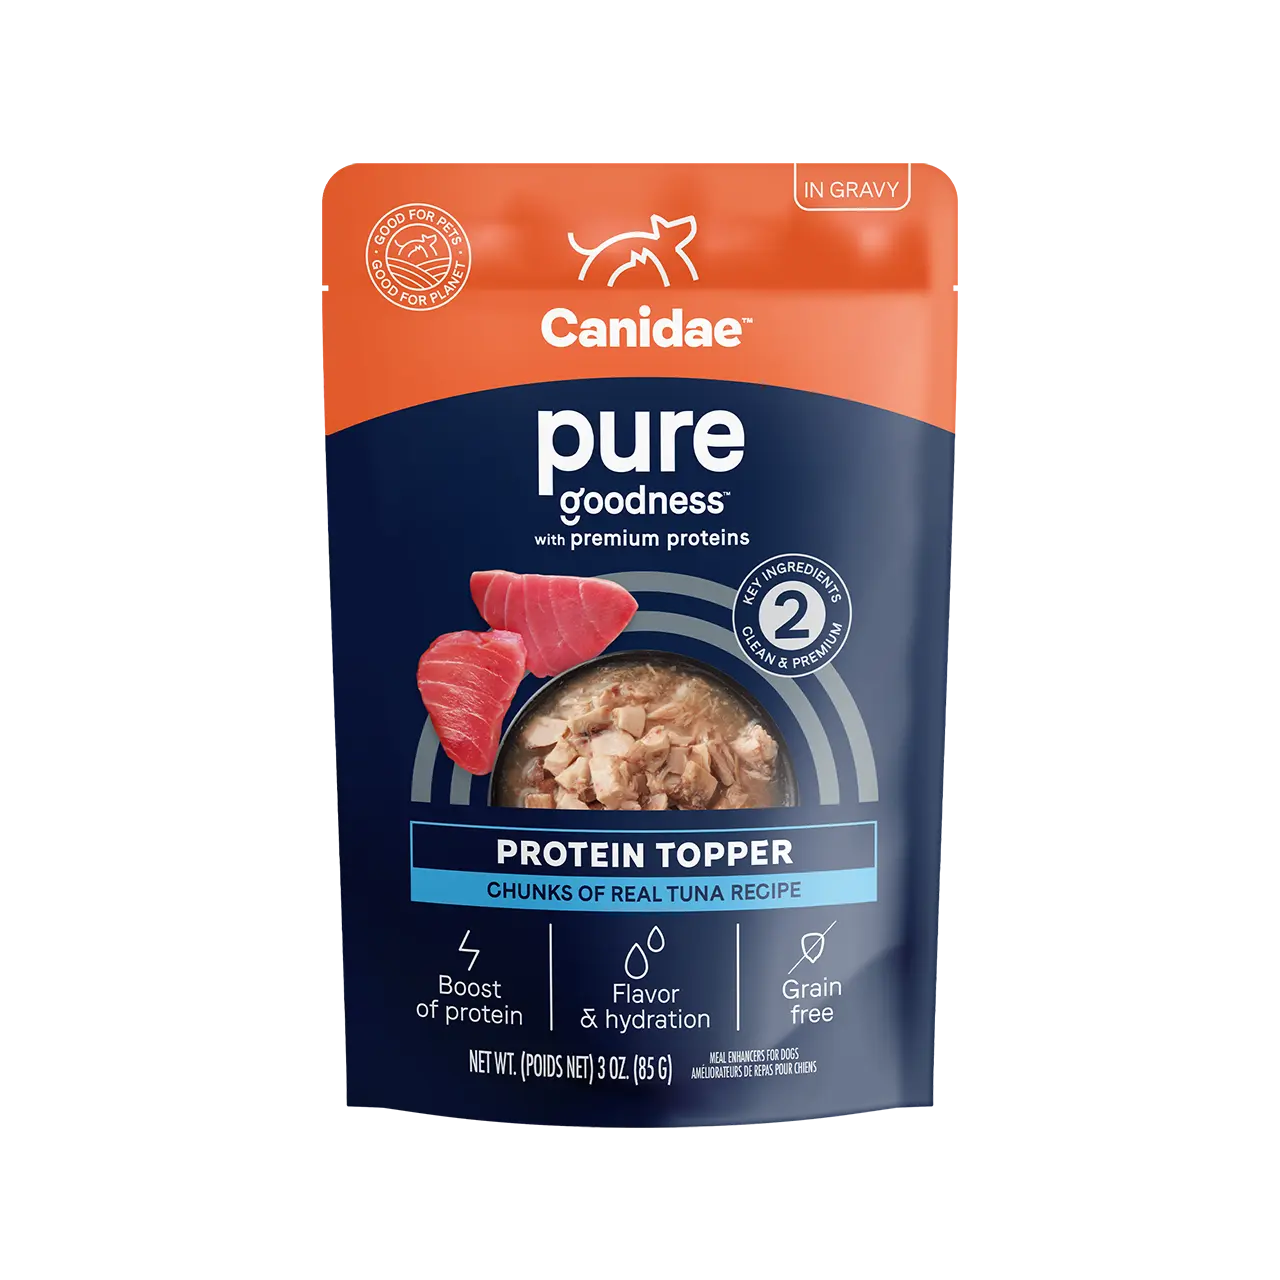 CANIDAE PURE Goodness Protein Topper for Dogs 12ea/3 oz CANIDAE